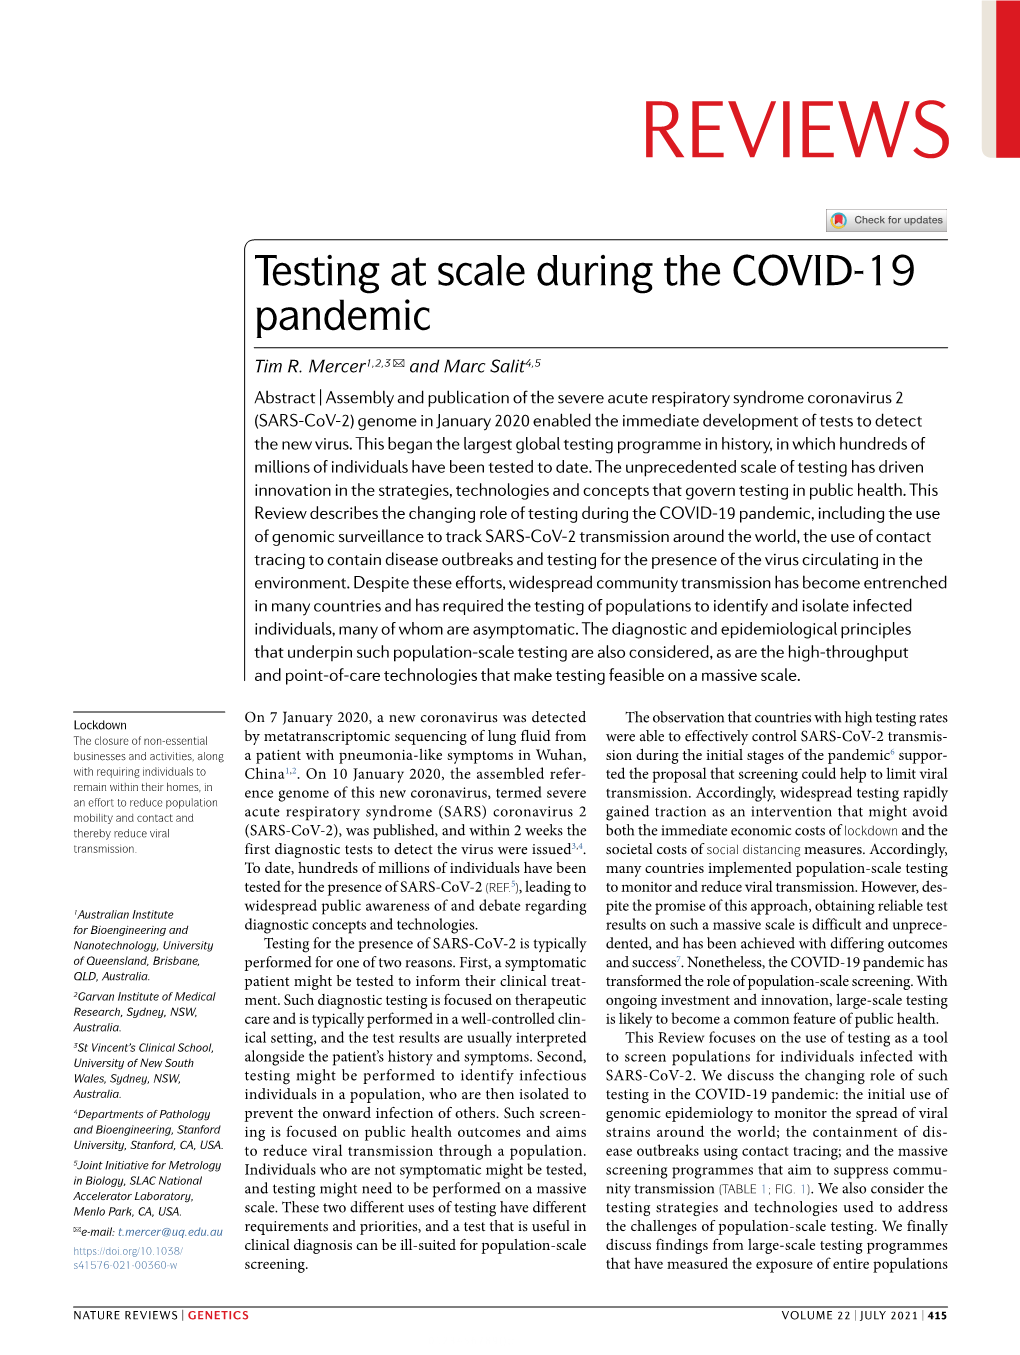 Testing at Scale During the COVID-19 Pandemic